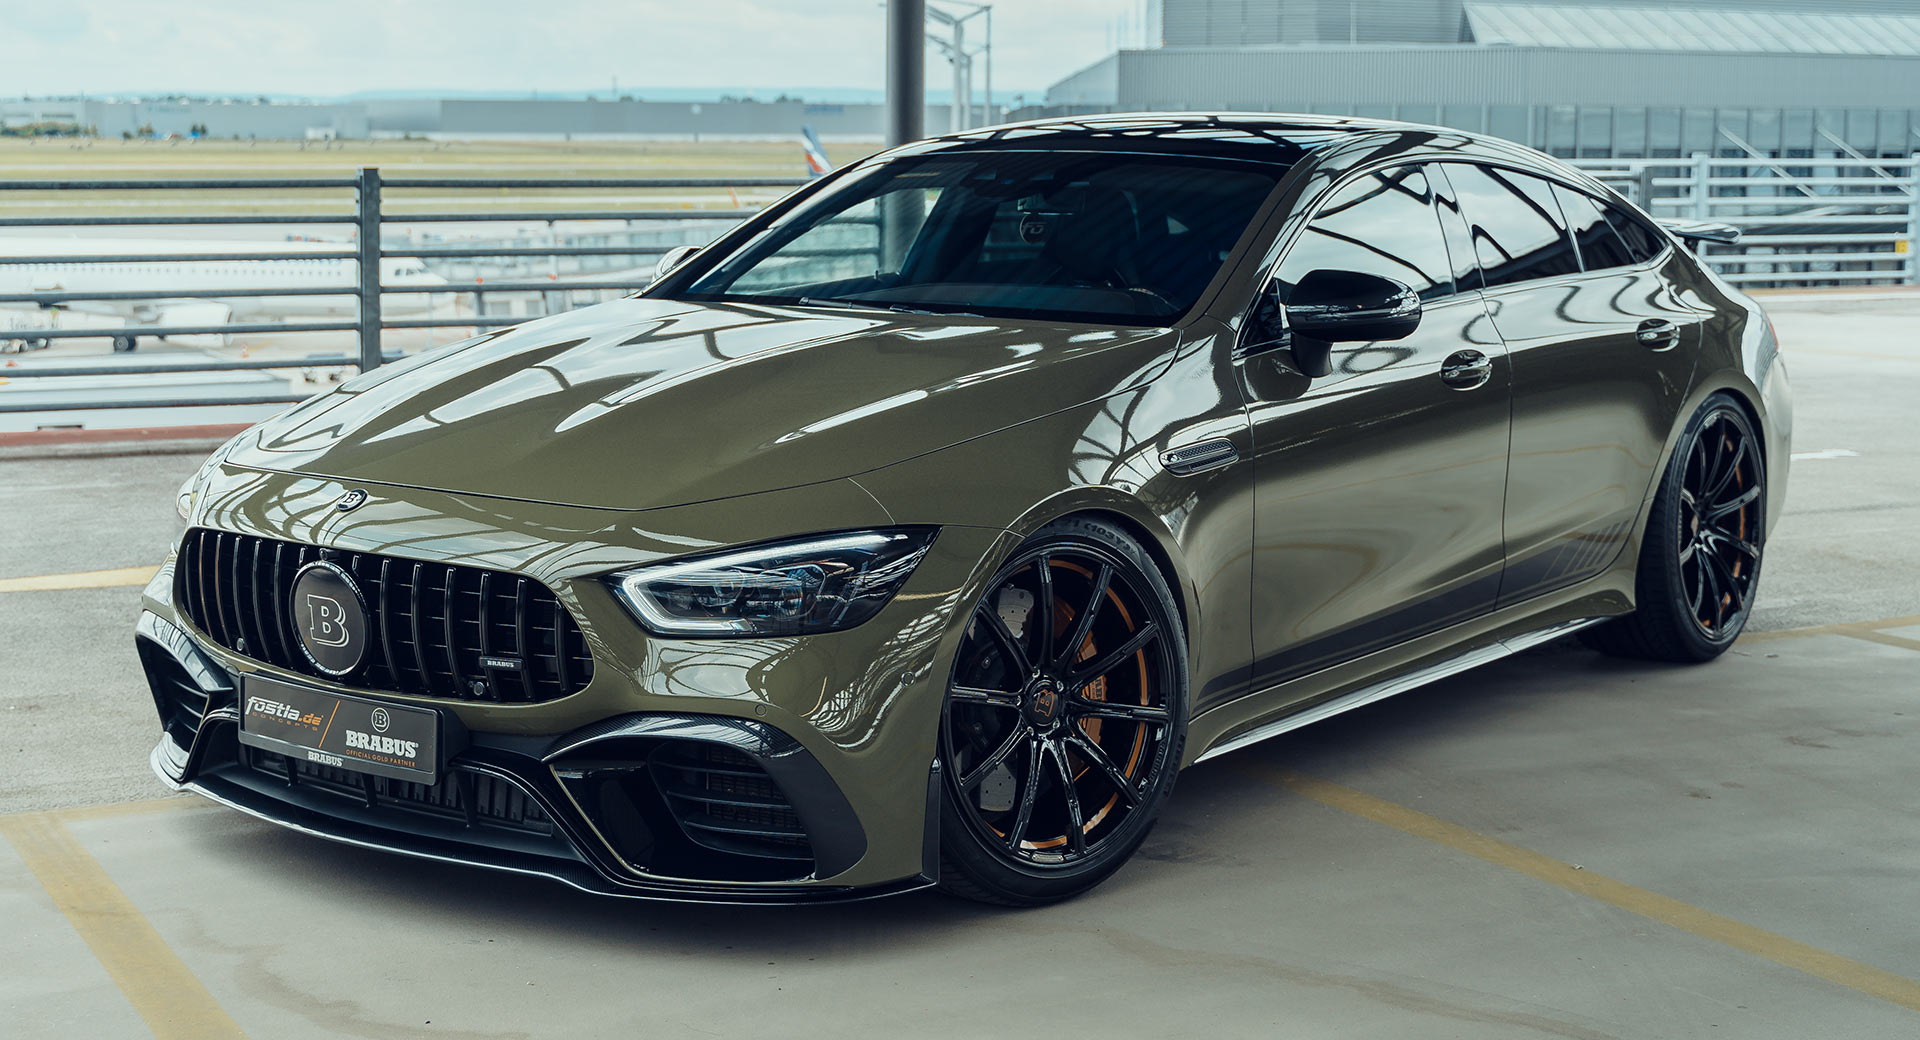 Brabus And Fostla Transform A Mercedes Amg Gt 63 S To Unique Looking 800 Hp Missile Carscoops